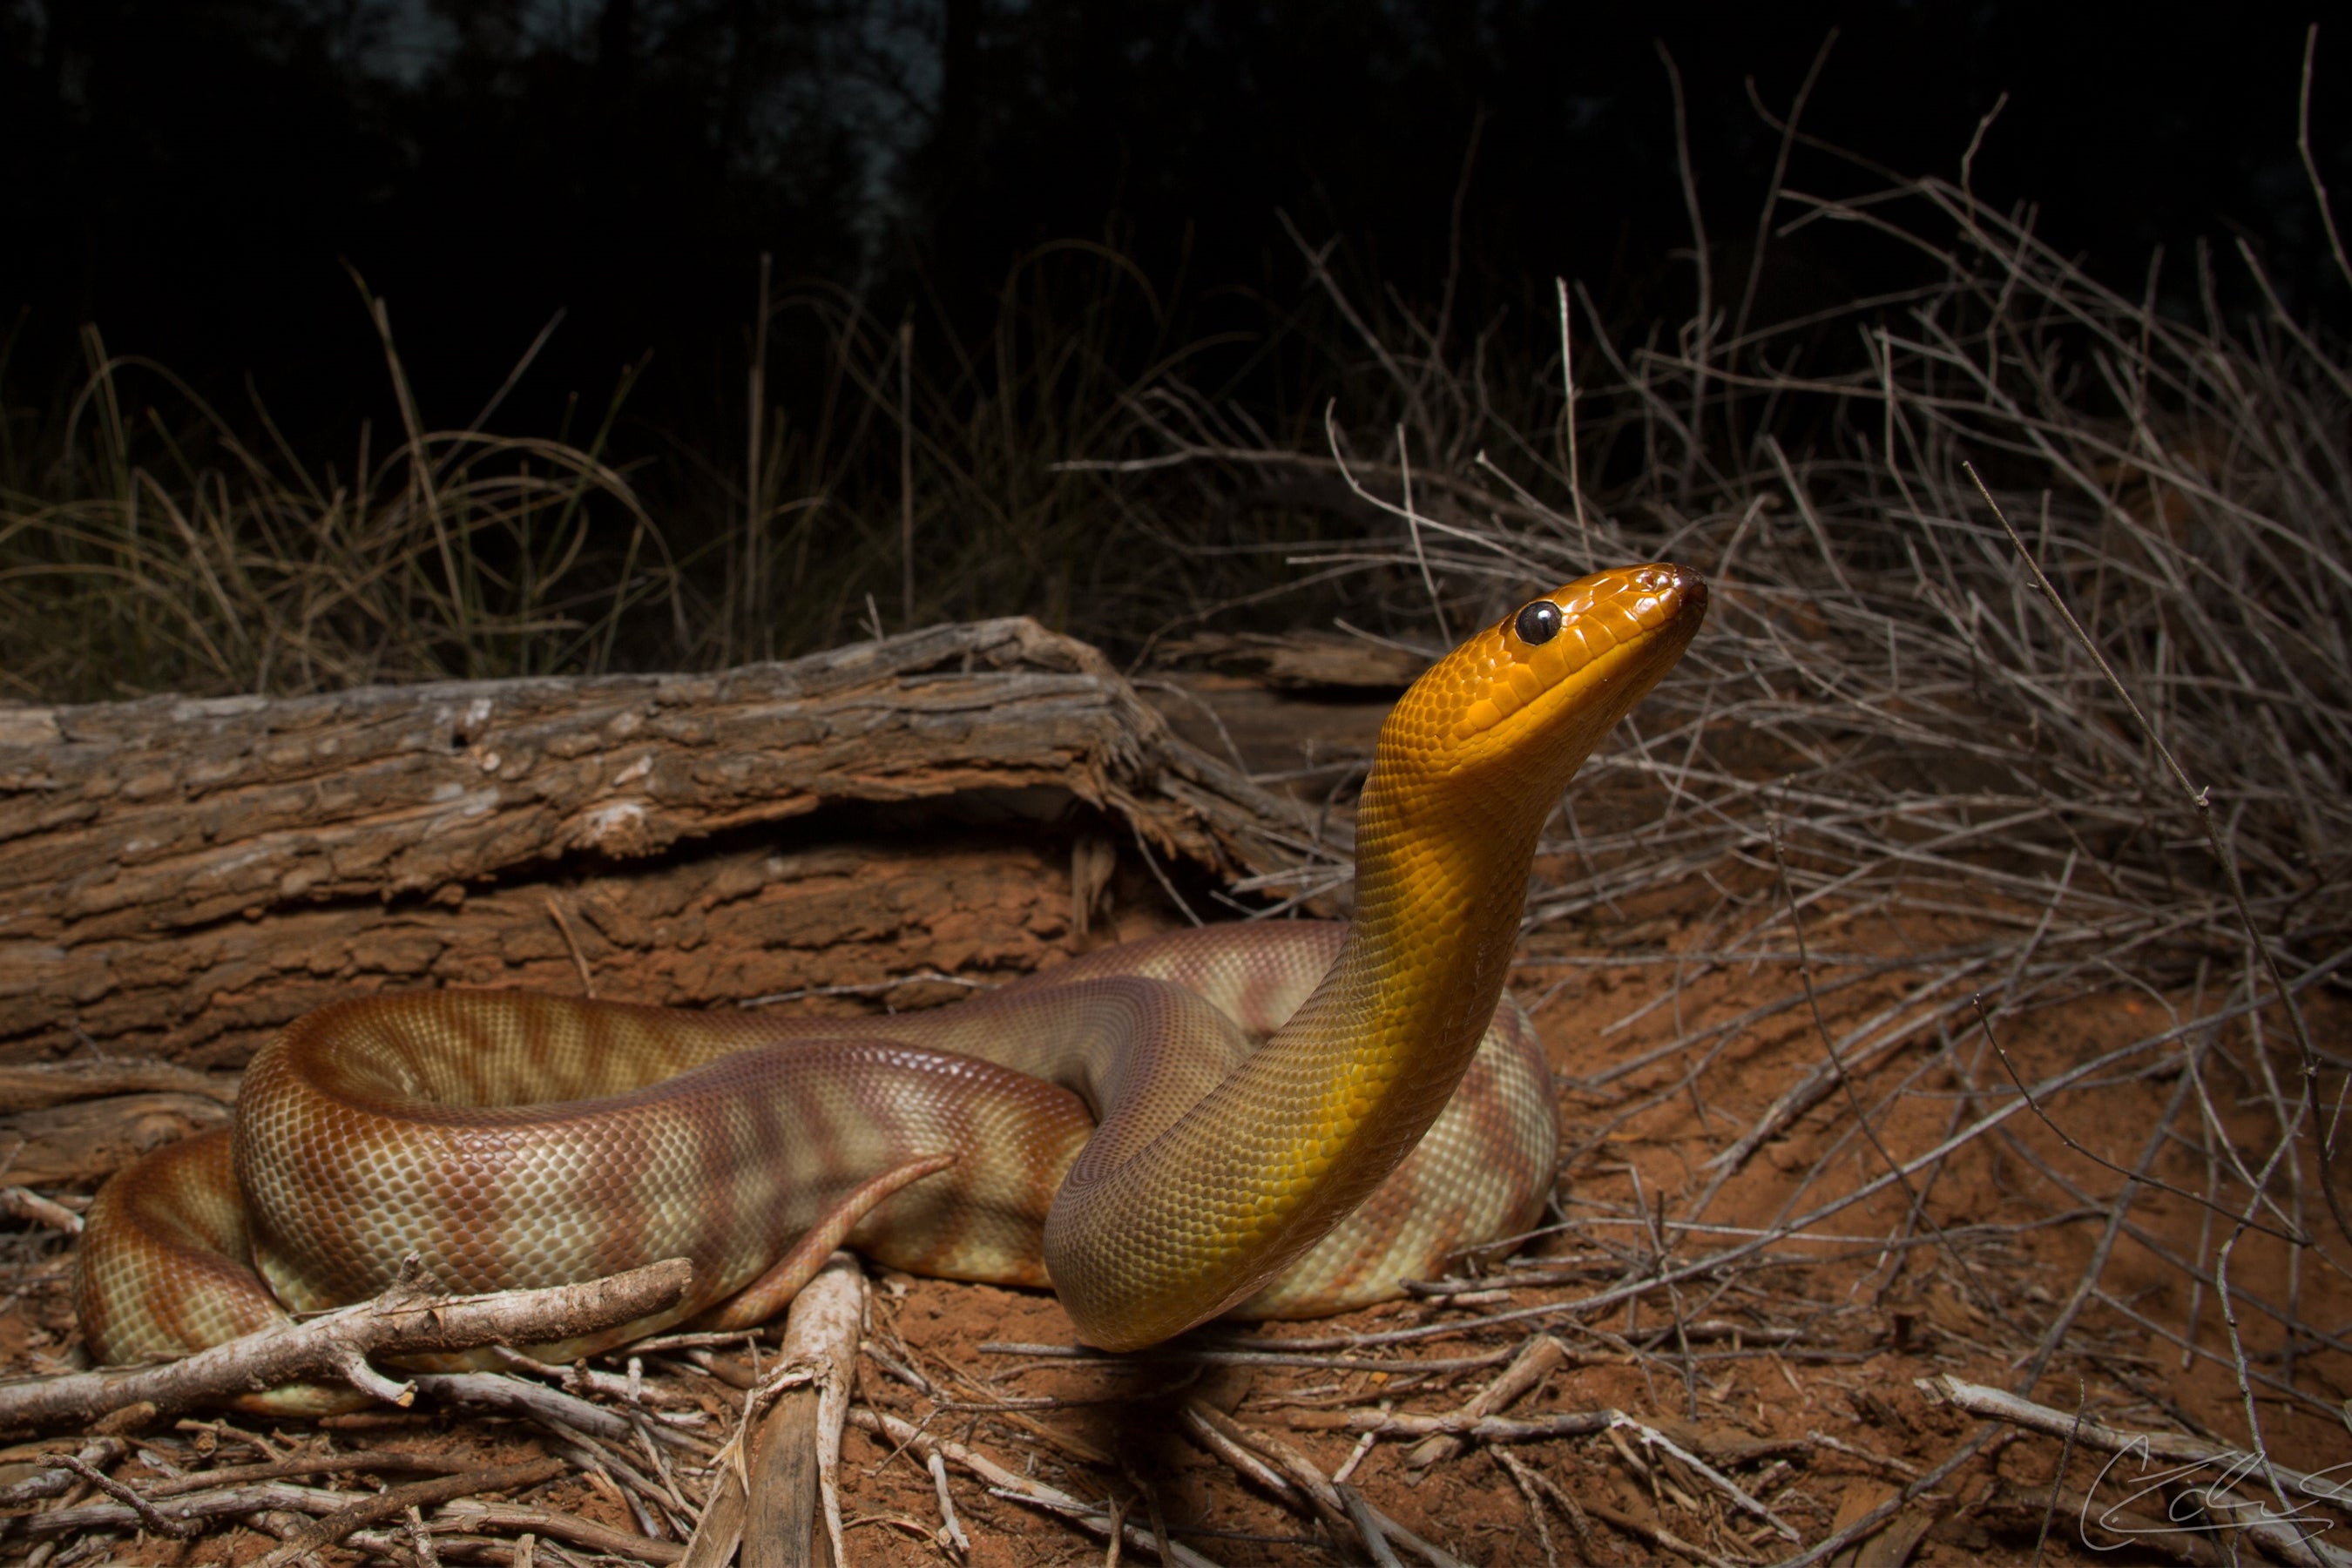 Snakes Can Hear You Scream, New Research Reveals - Scientific American